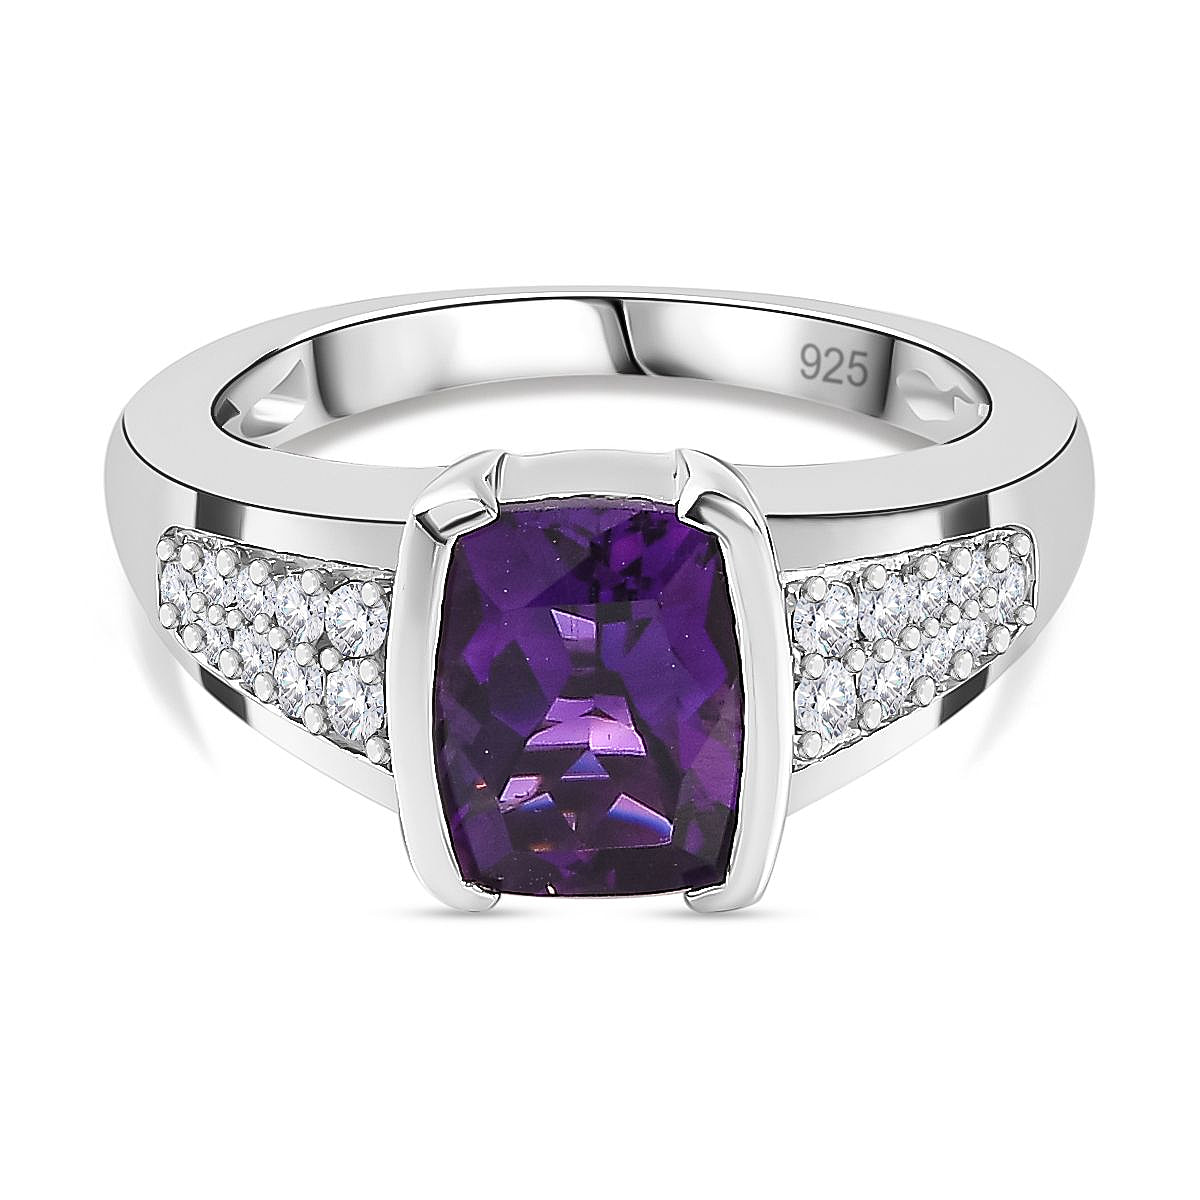 Moroccan Amethyst & Natural Zircon Ring in Platinum Overlay Sterling Silver 2.45 Ct.